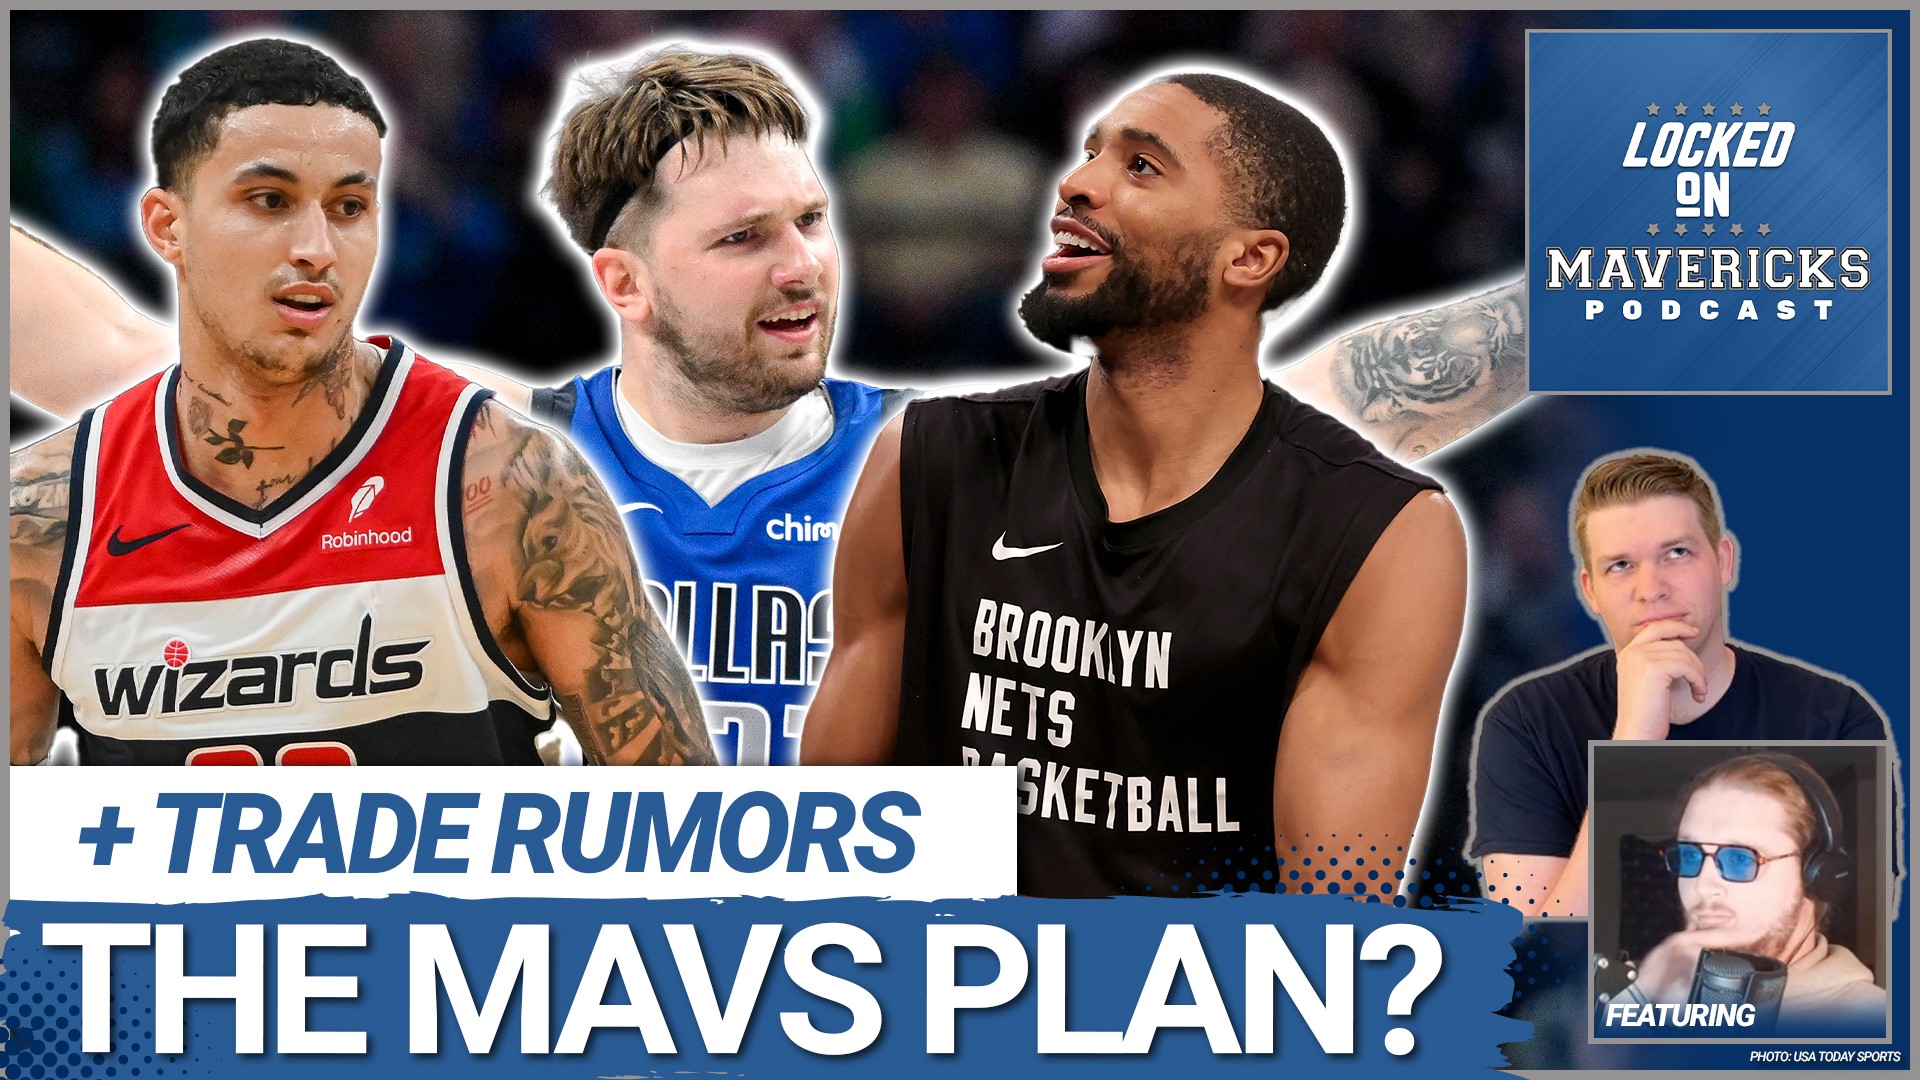 Nick Angstadt & Slightly Biased breakdown the Dallas Mavericks' long-term plan for a trade to get better and ask if Kyle Kuzma is the answer to help Luka Doncic.